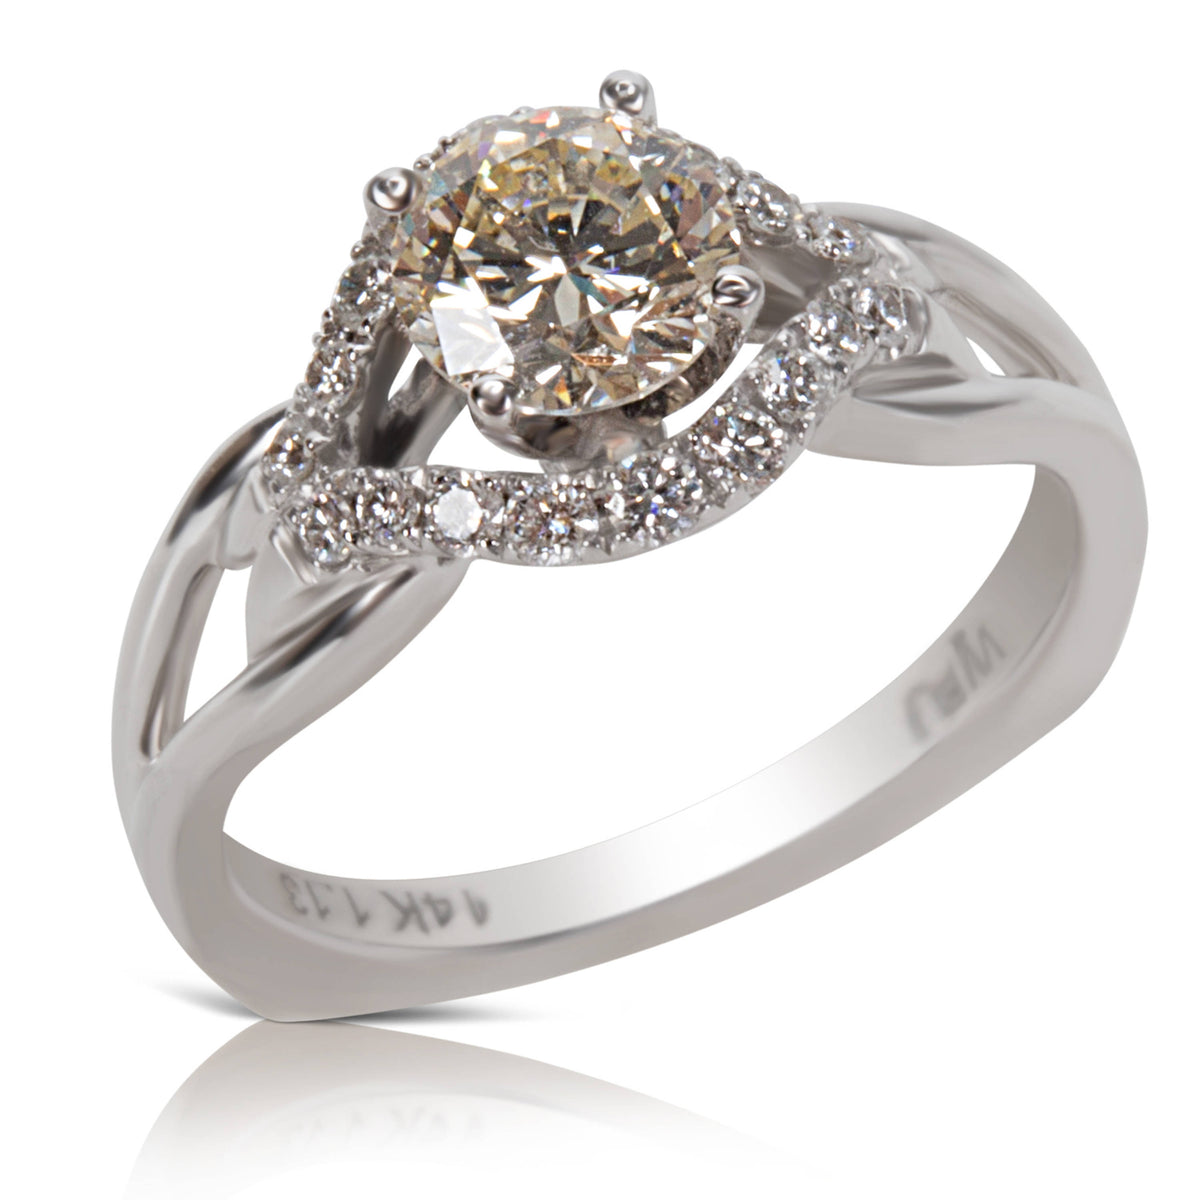 BRAND NEW Diamond Halo Engagement Ring in 14K White Gold (1.13 CTW)